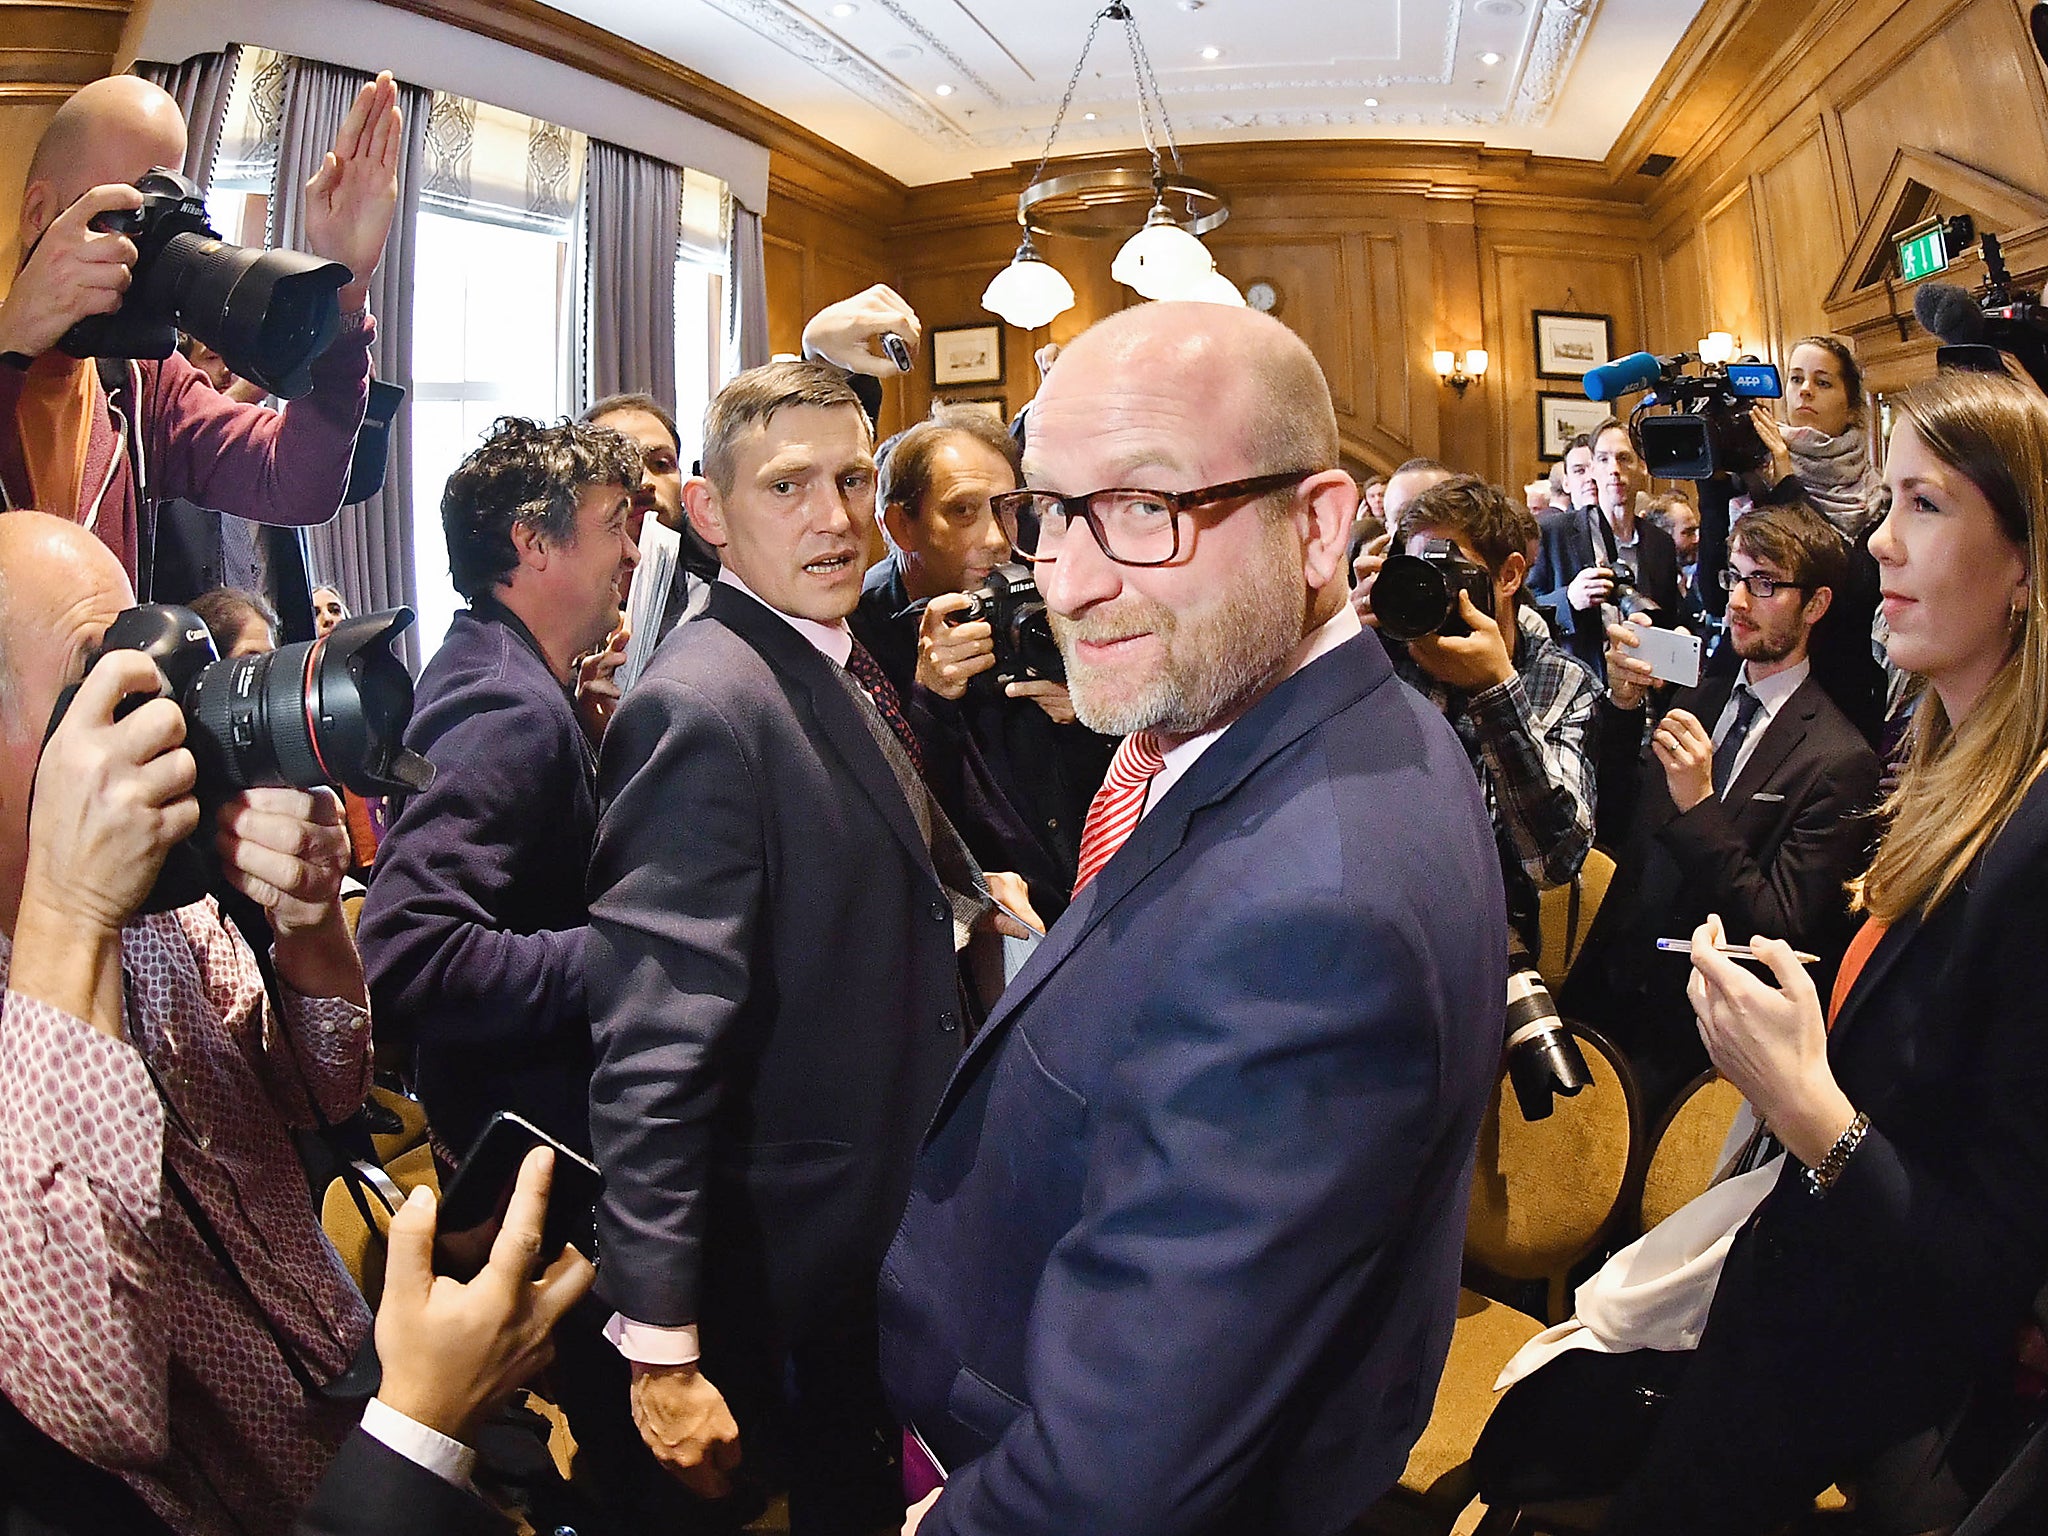 The resignation came after party leader Paul Nuttall announced the policies on Monday